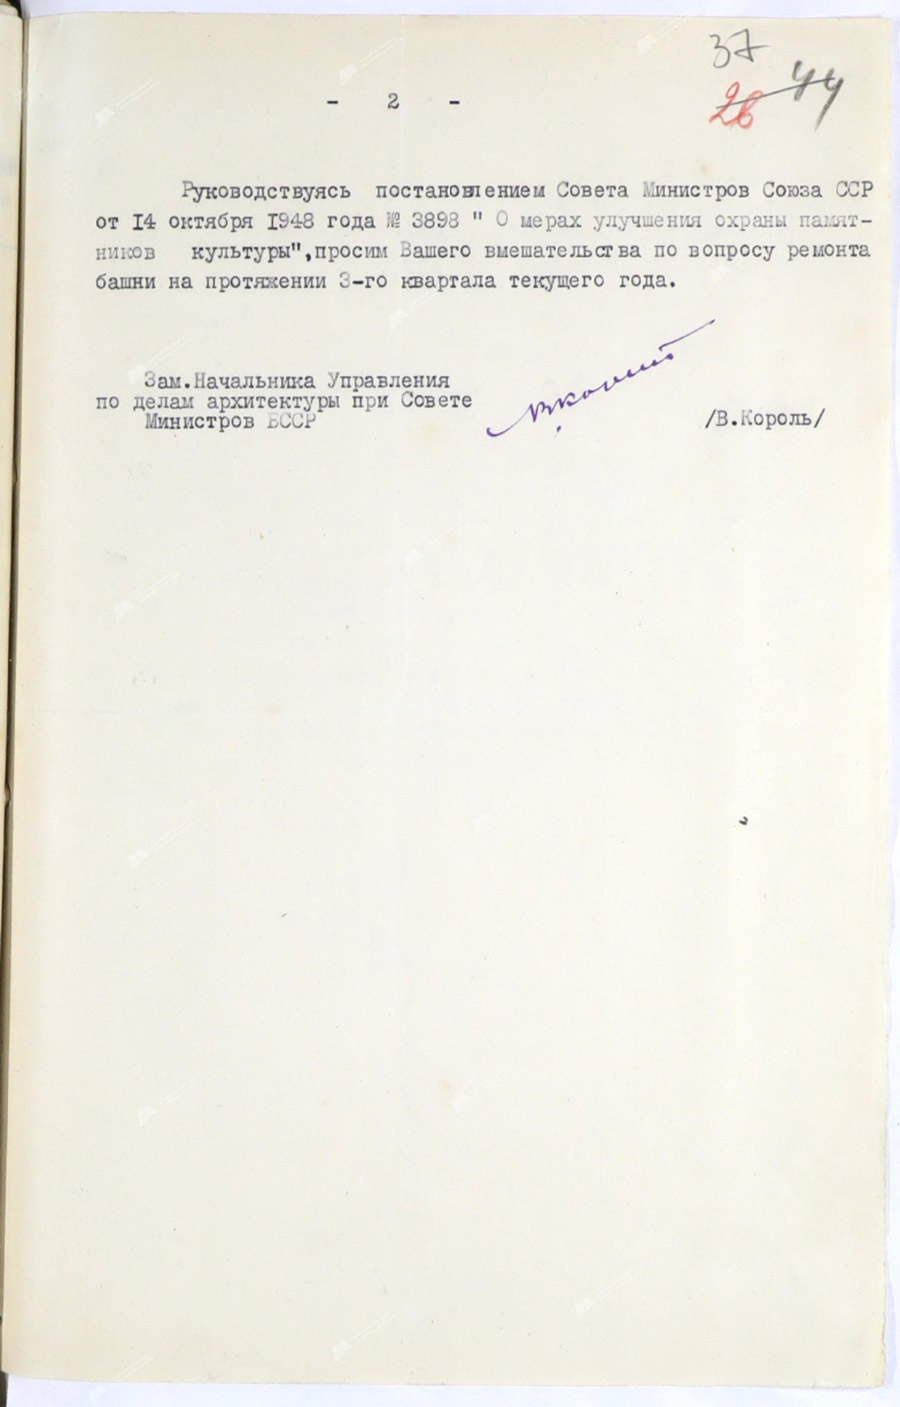 Letter from the deputy. Head of the Directorate for Architectural Affairs under the Council of Ministers of the BSSR on July 13, 1949 on the issue of repairing the St. Sophia Cathedral in Polotsk-стр. 1